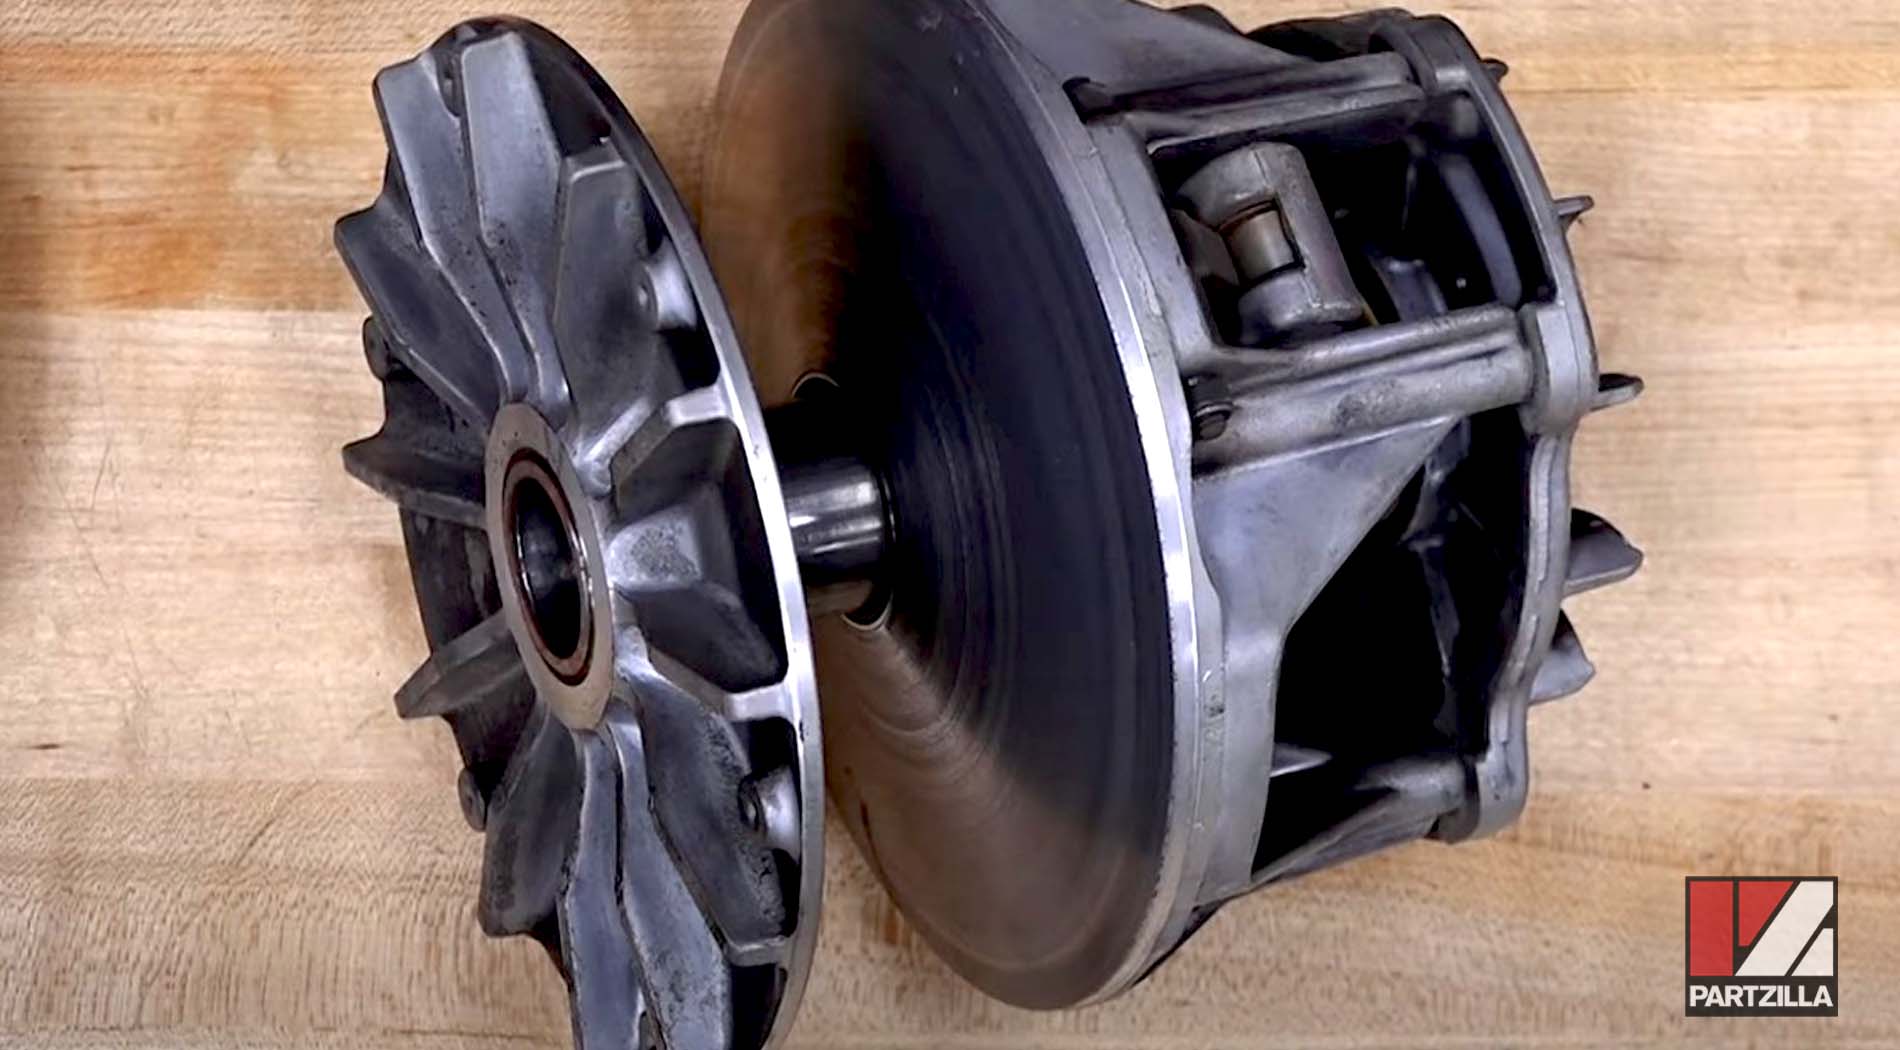 How to inspect a CVT clutch